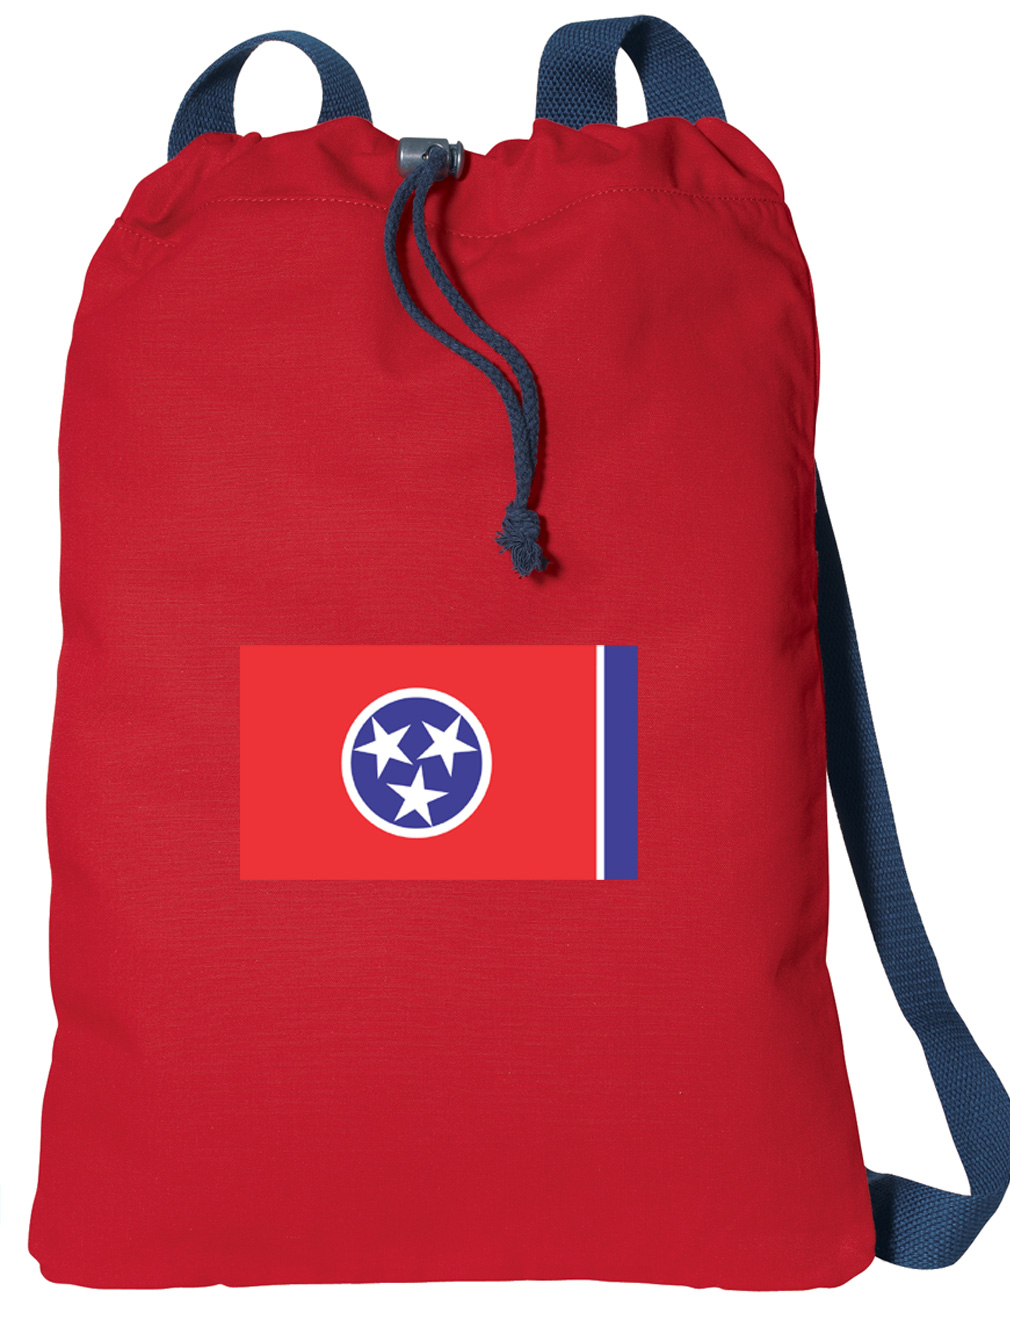 Canvas Tennessee Drawstring Bag DELUXE Tennessee Flag Backpack Cinch Pack for Him or Her - image 1 of 2